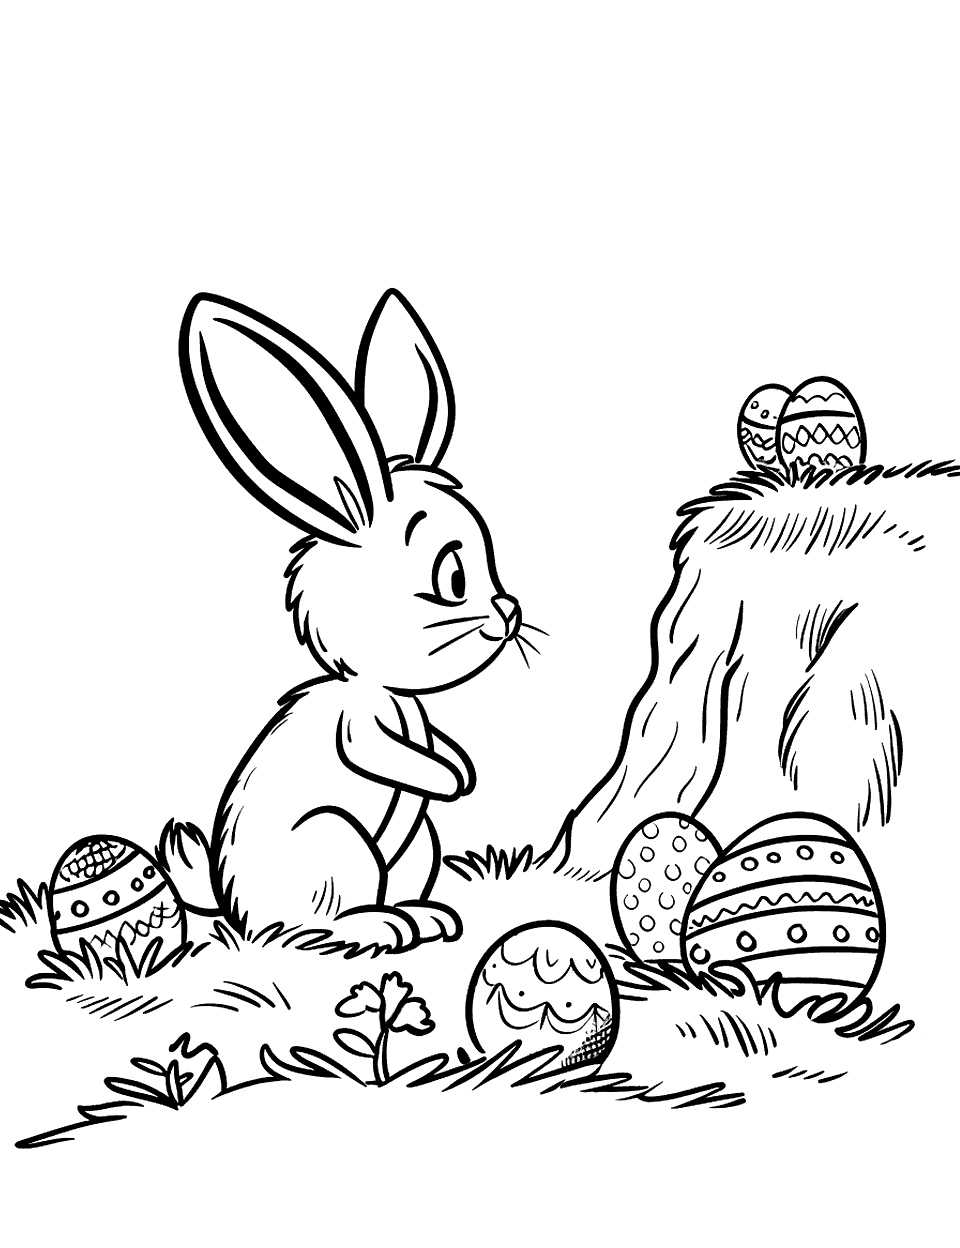 Mountain View Easter Bunny Coloring Page - A bunny at the base of a mountain with several Easter eggs around it, symbolizing the start of a journey.